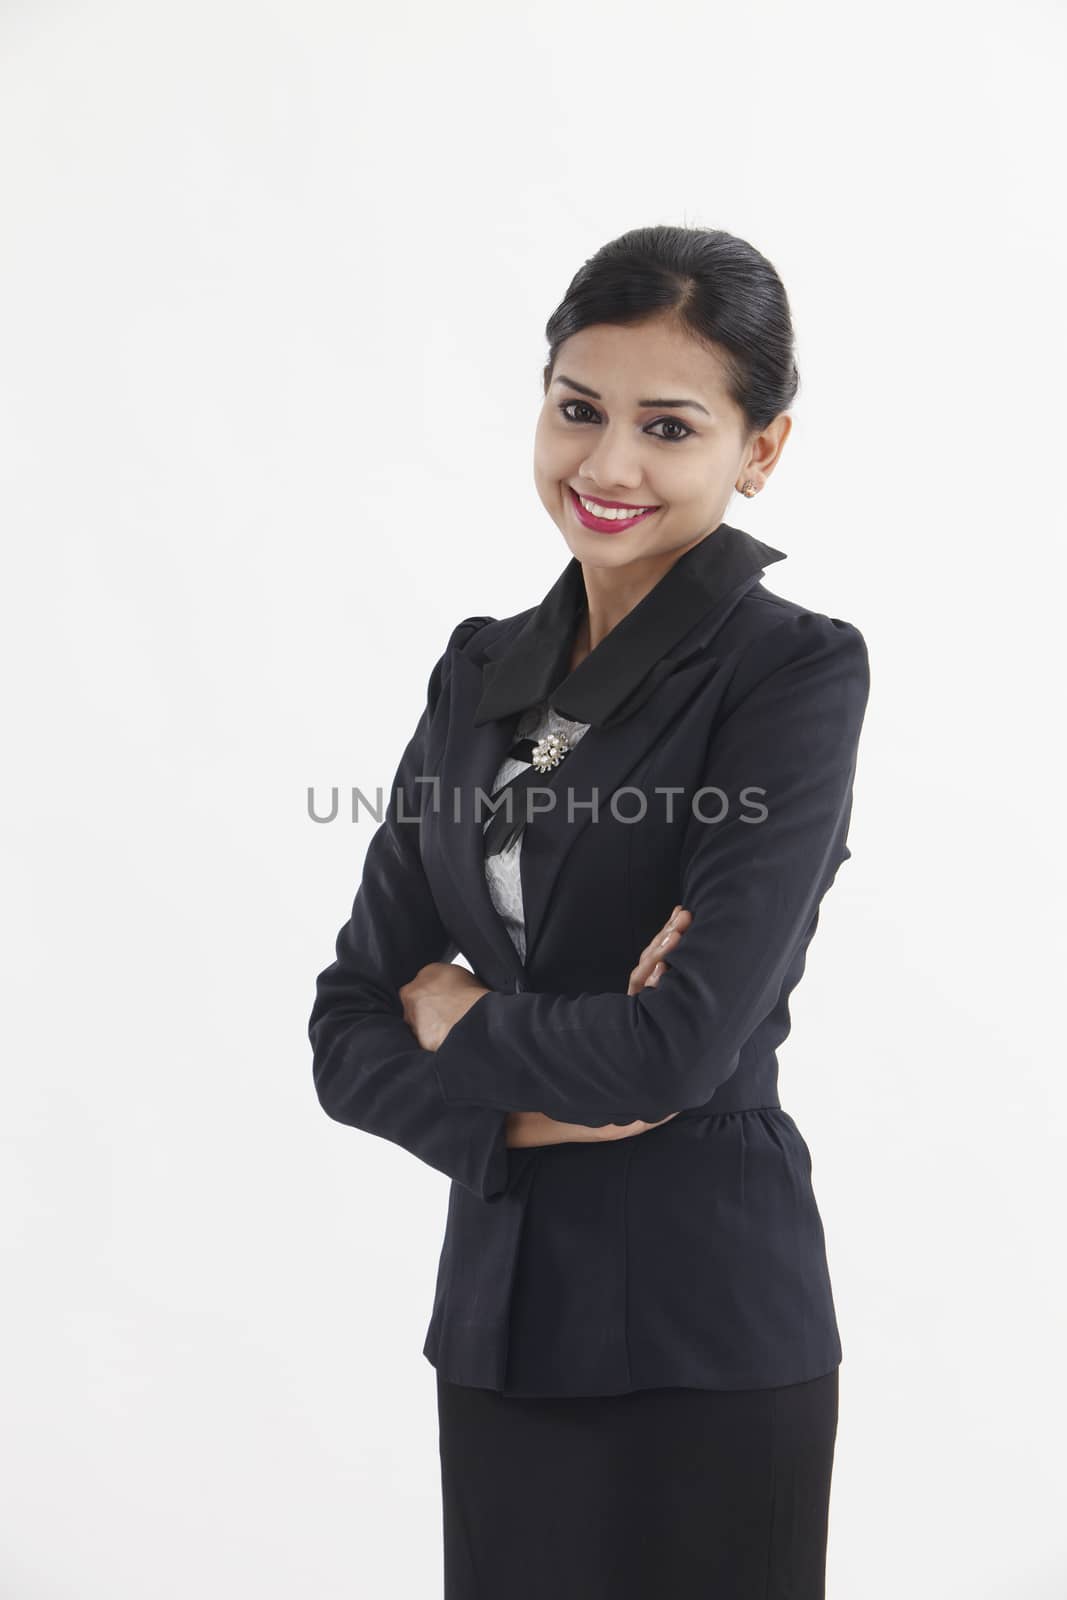 Portrait of a well-dressed young business woman with cross-armed

